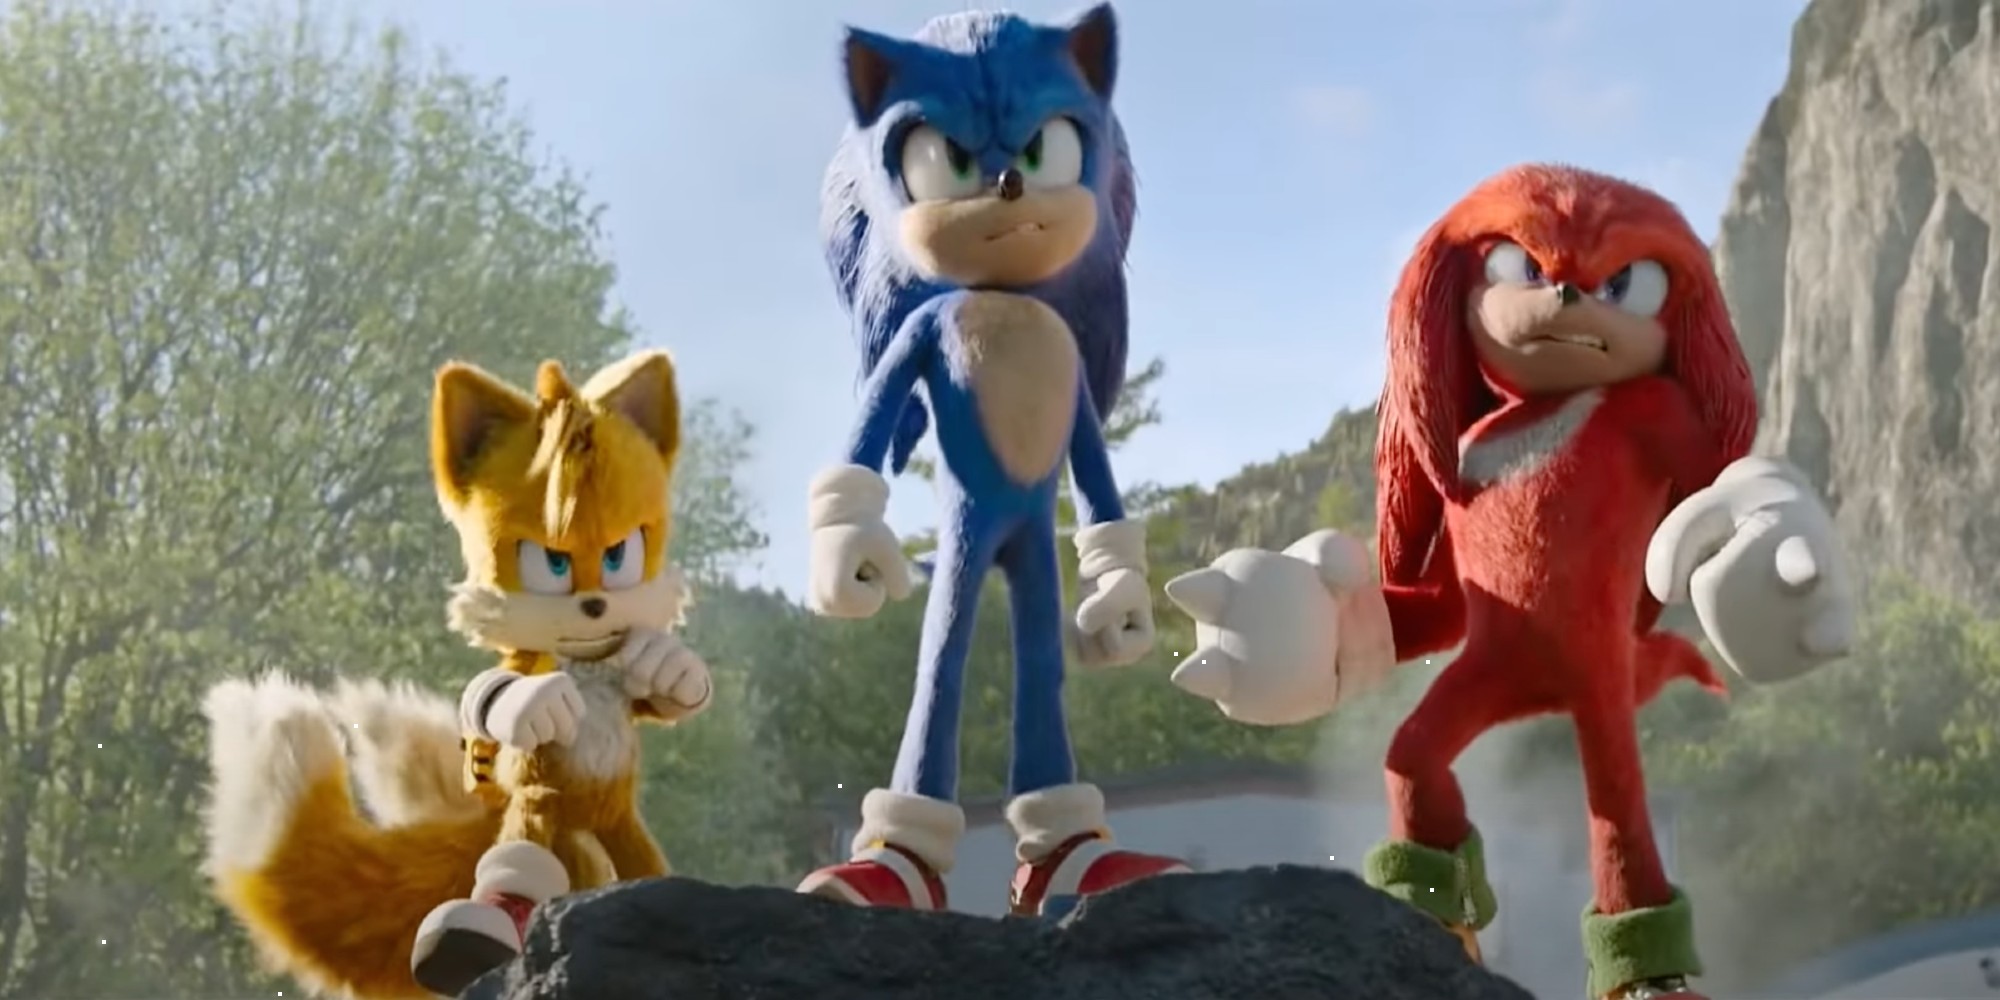 Sonic The Hedgehog 2 Spins To The Top Of The Box Office in 2023